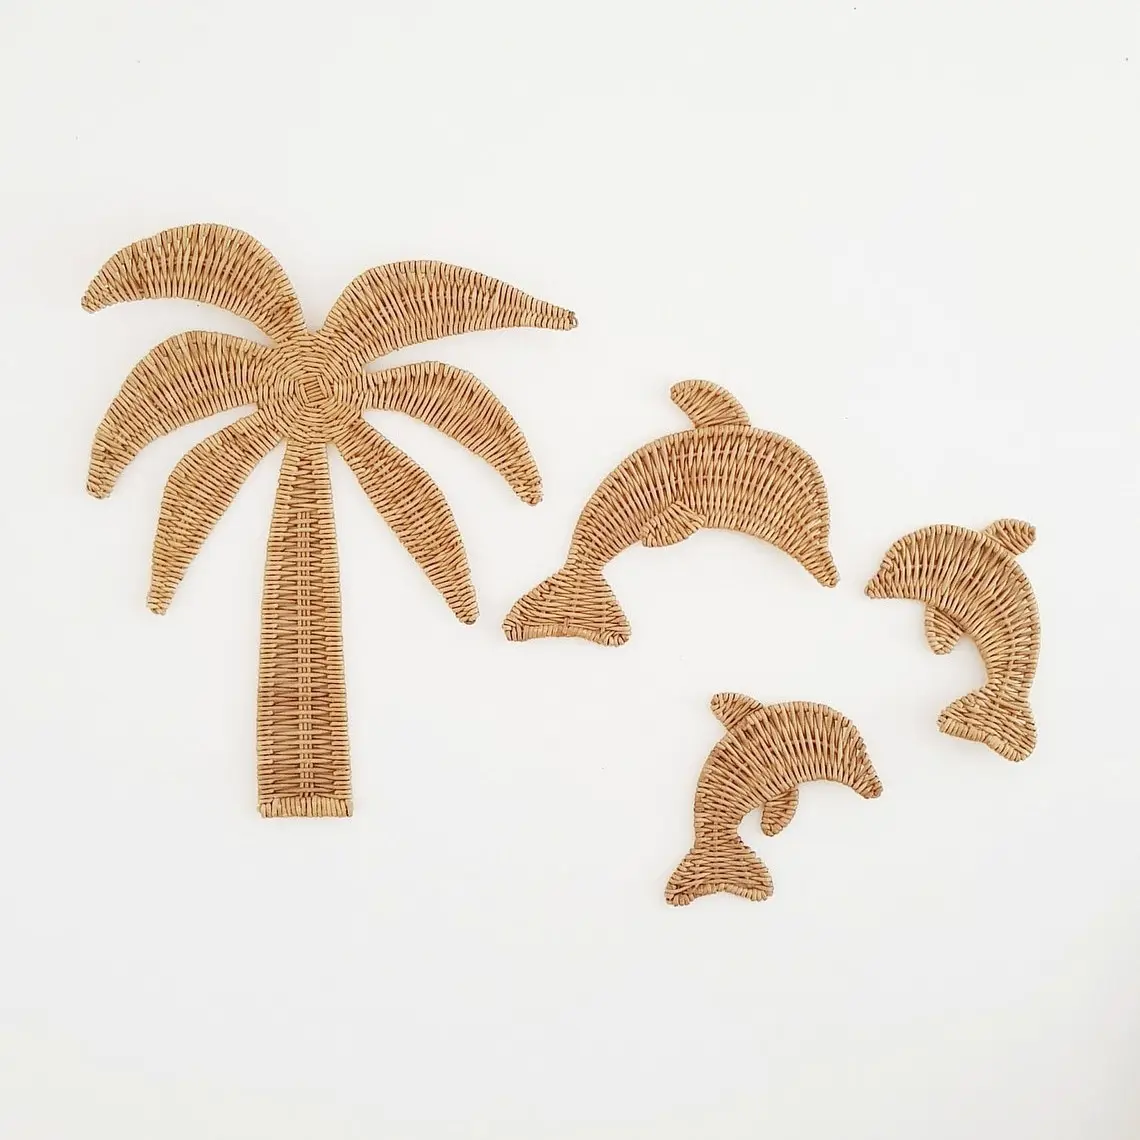 Rattan baby room decoration wall nursery decorative decals coconut palm tree and dolphin animal set